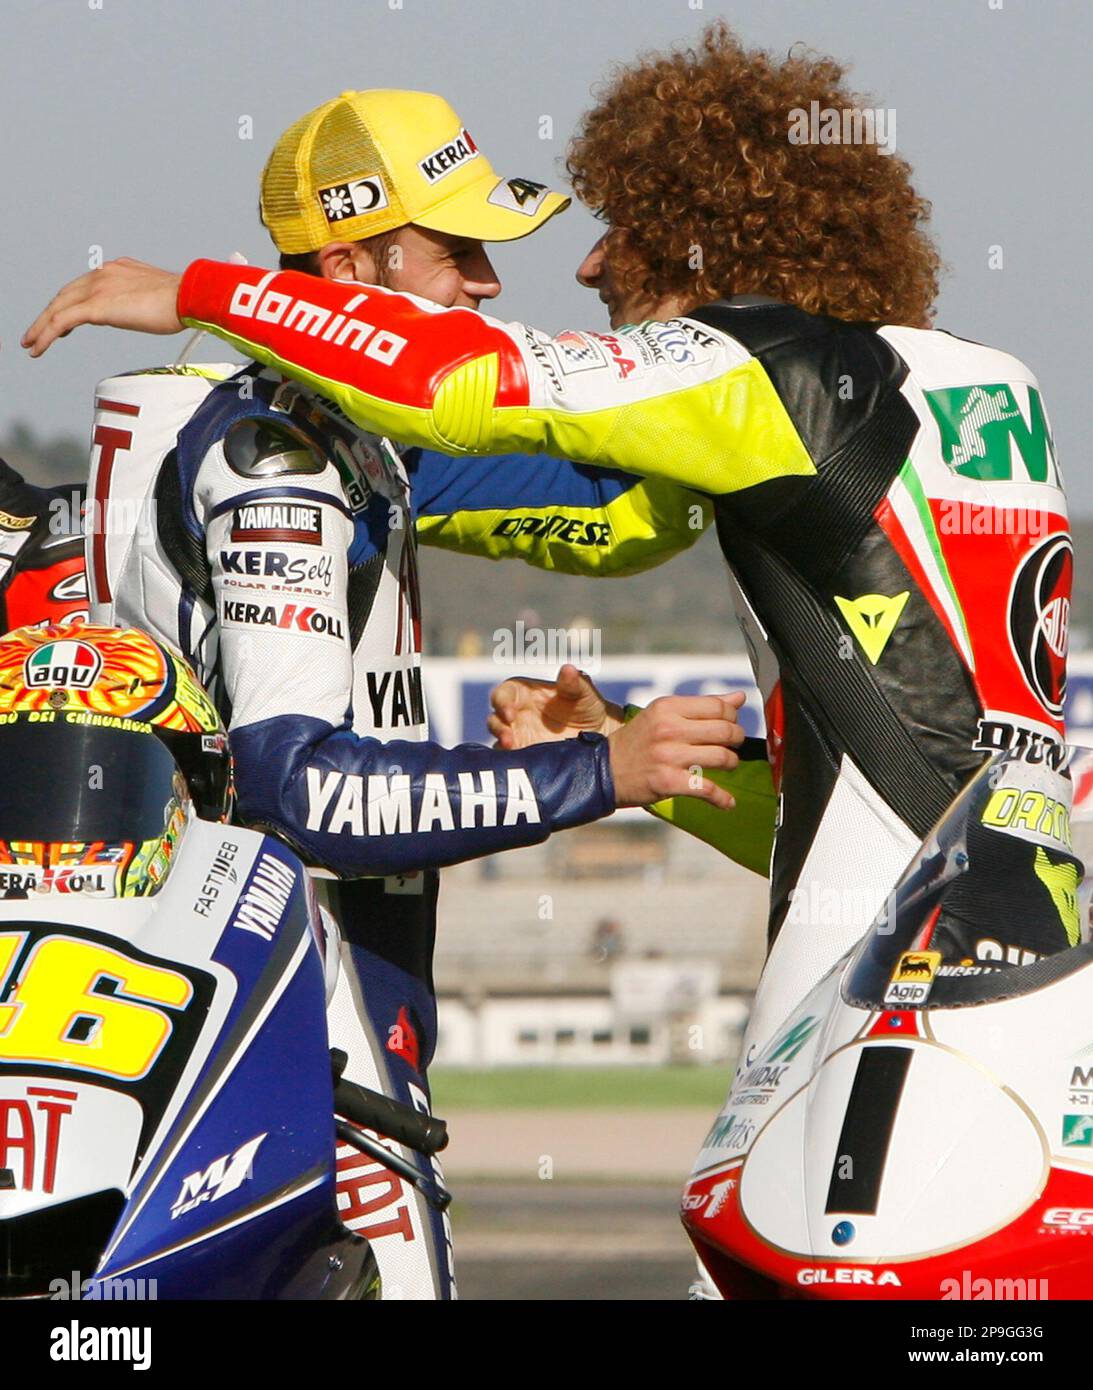 Moto GP World Champion Valentino Rossi of Italy, left, and the World 250cc Marco Simoncelli of Italy, embrace the Valencia Motorcycle Grand Prix, the last race of the season,